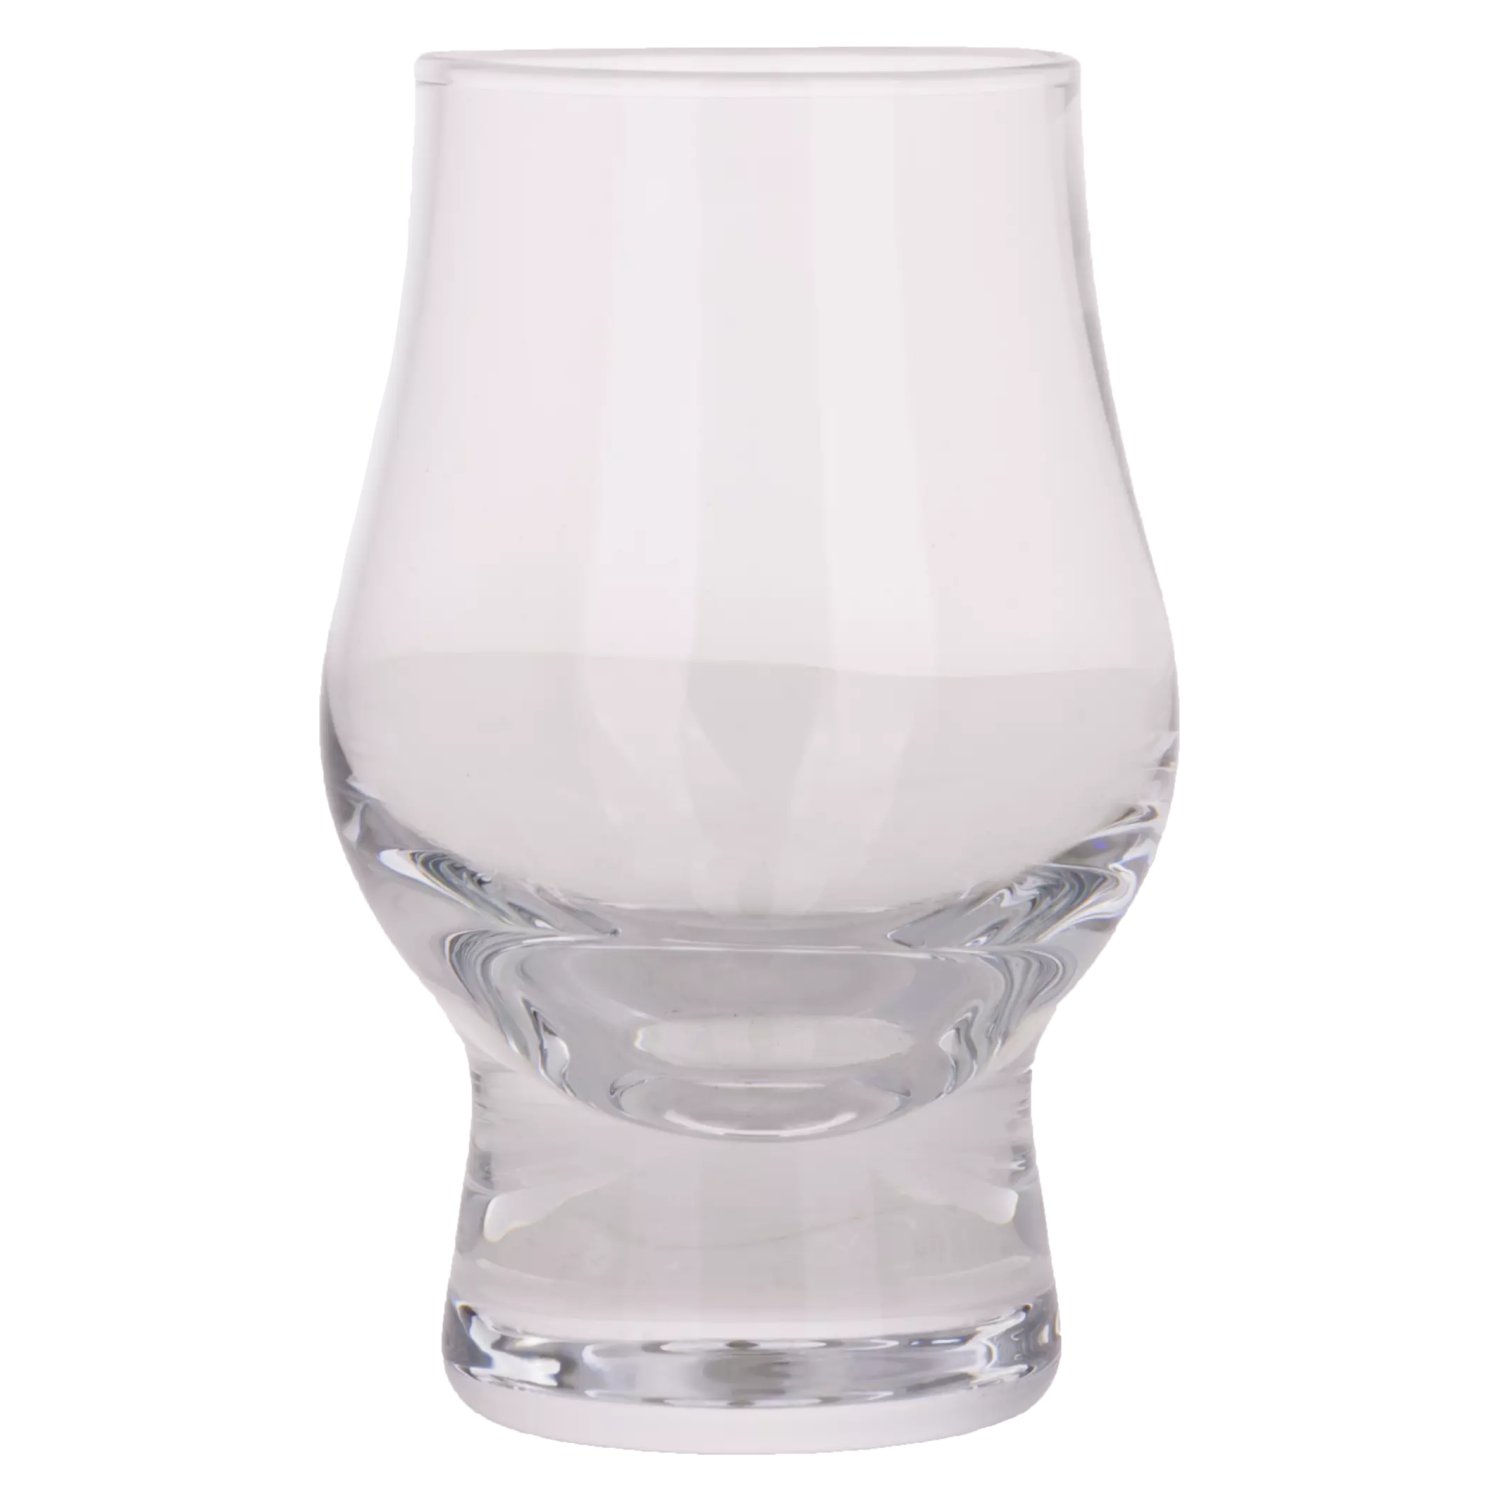 Is this the perfect whisky glass?